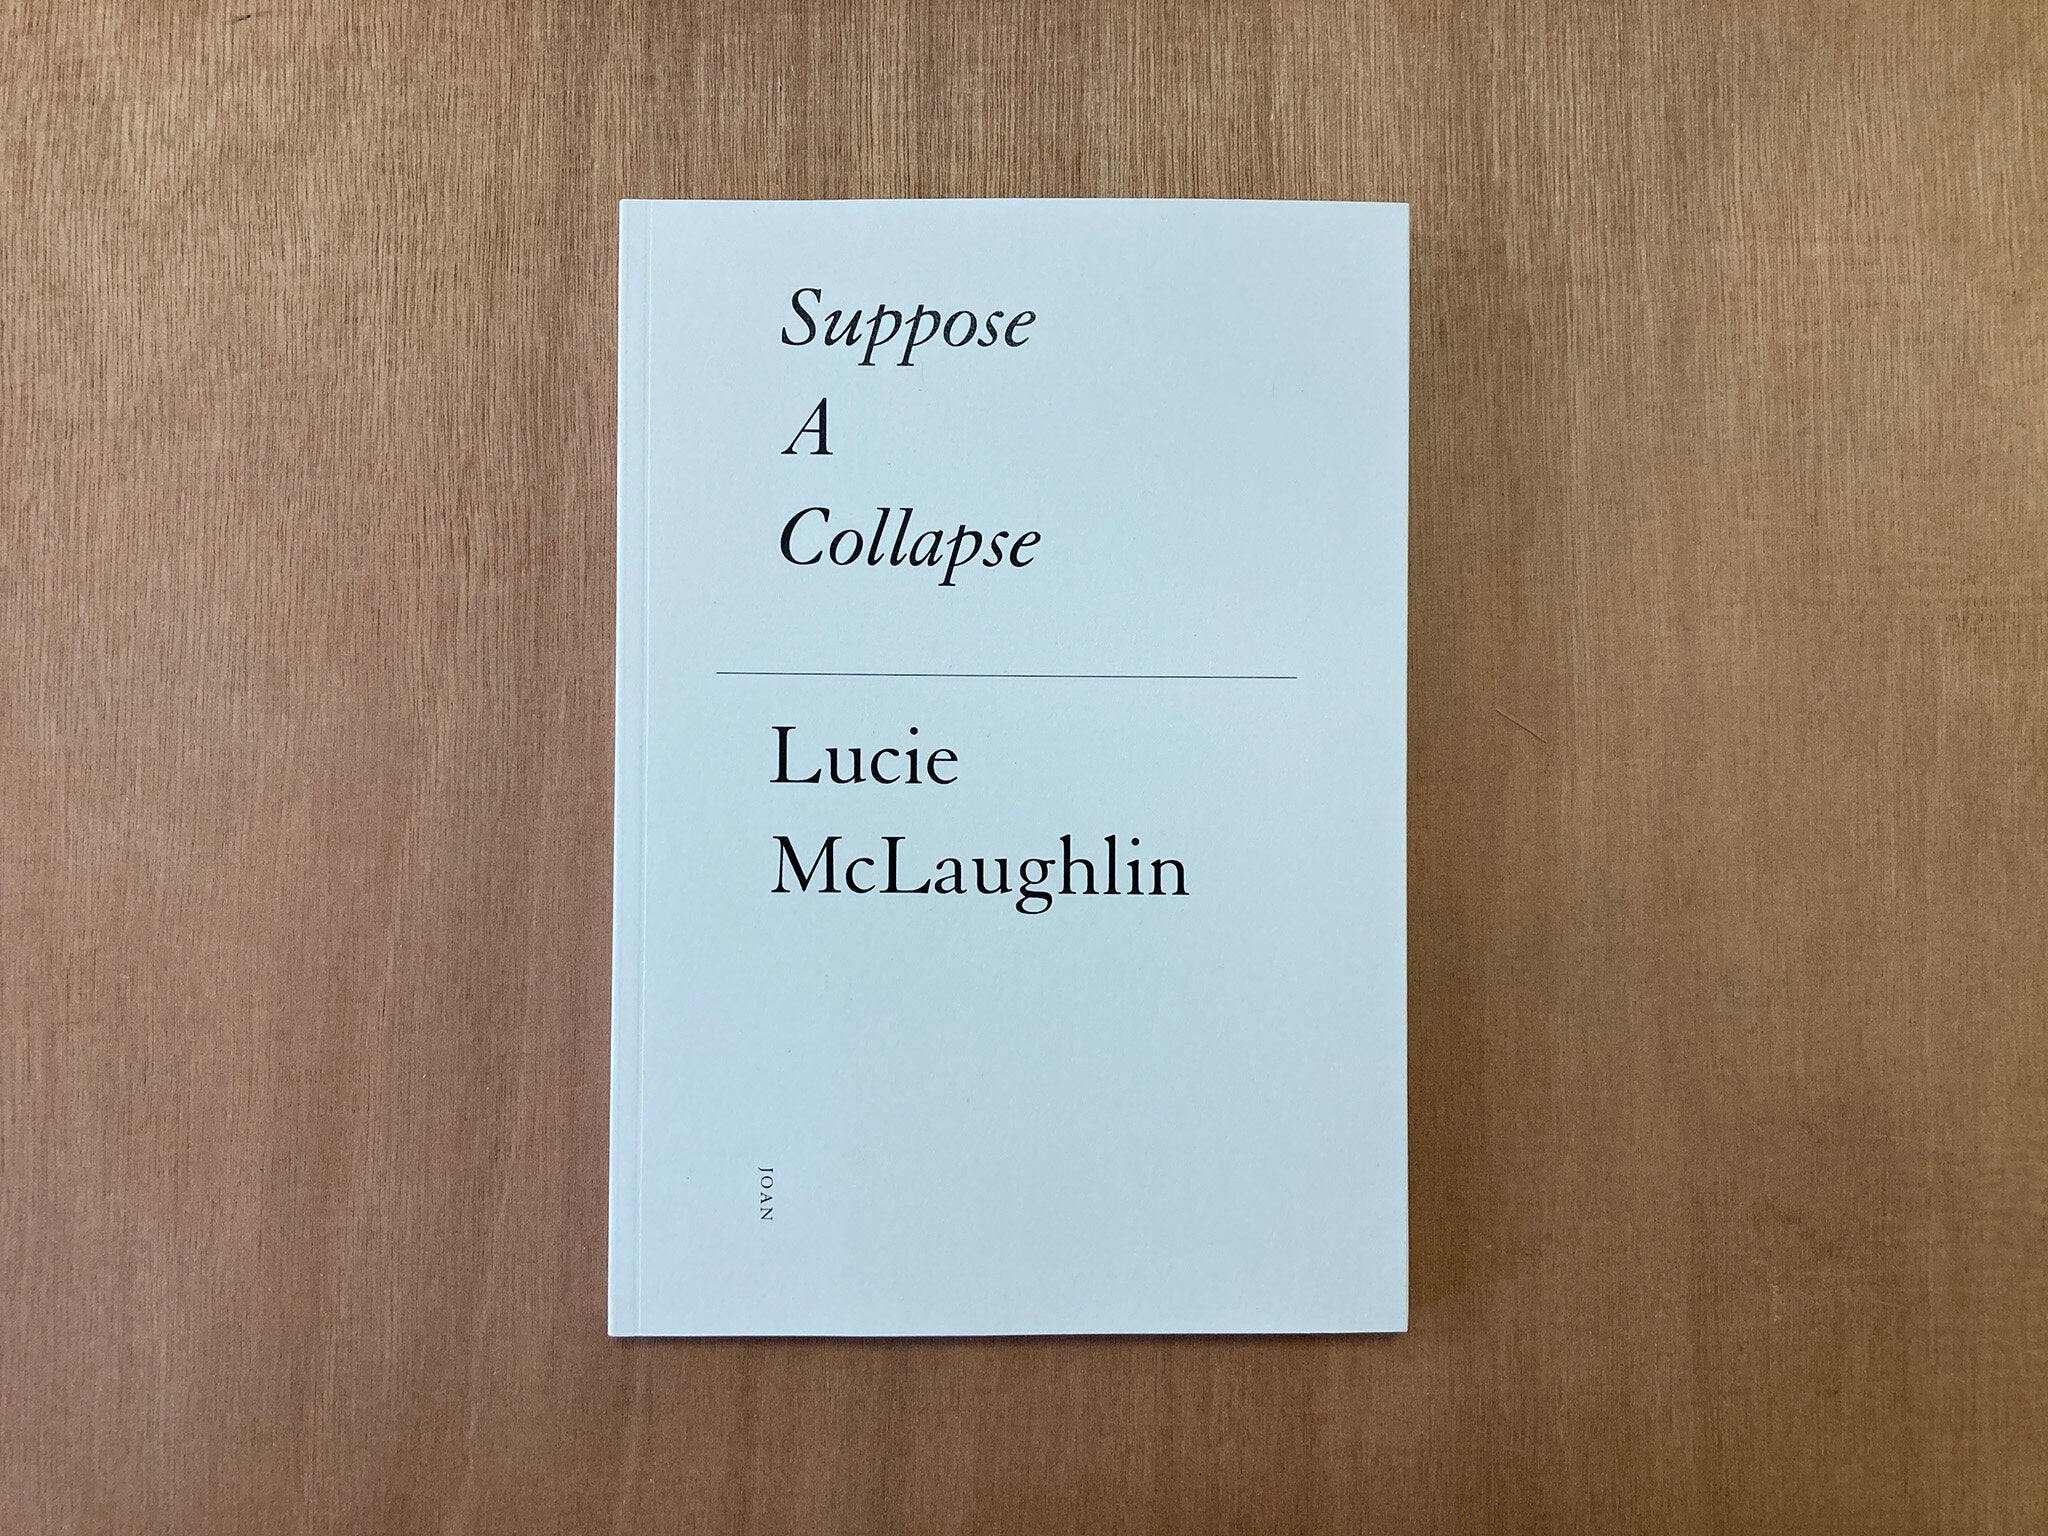 SUPPOSE A COLLAPSE by Lucie McLaughlin